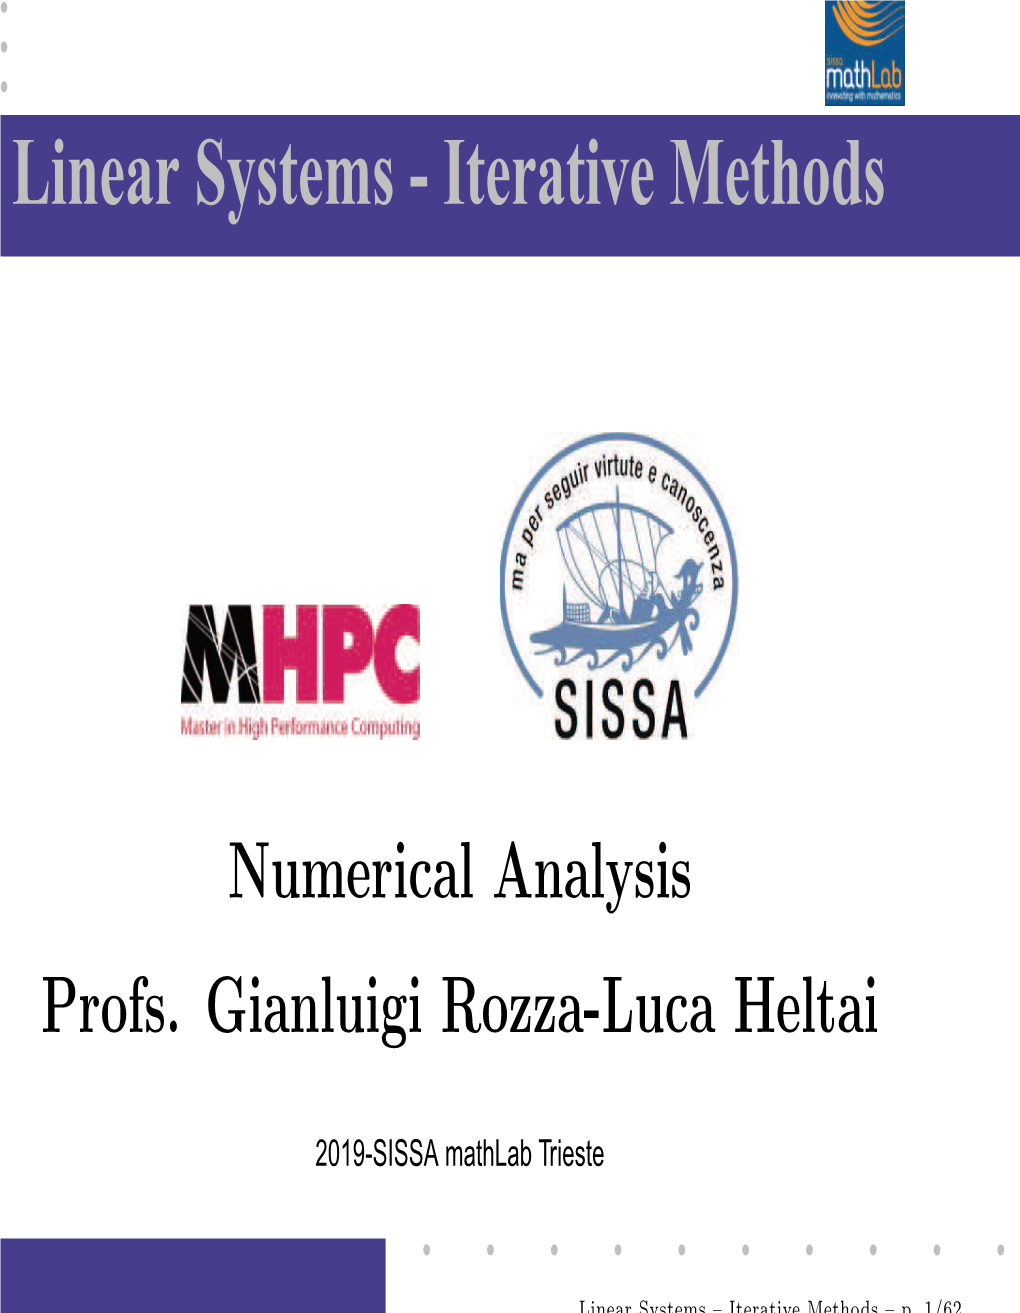 Linear Systems - Iterative Methods